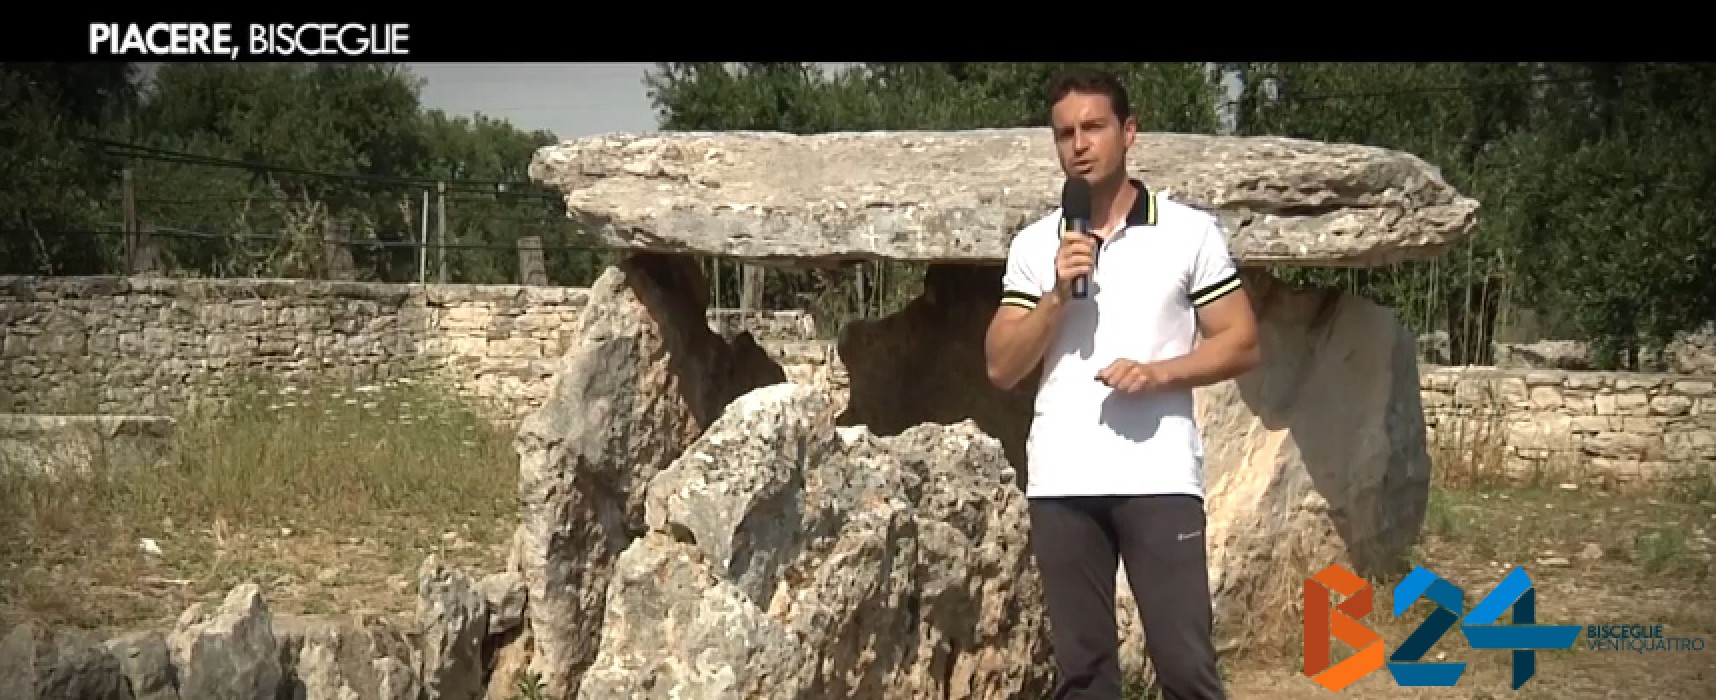 Bisceglie’s wonderful countryside: “Piacere, Bisceglie” discloses dolmen, grottoes and farmhouse / VIDEO